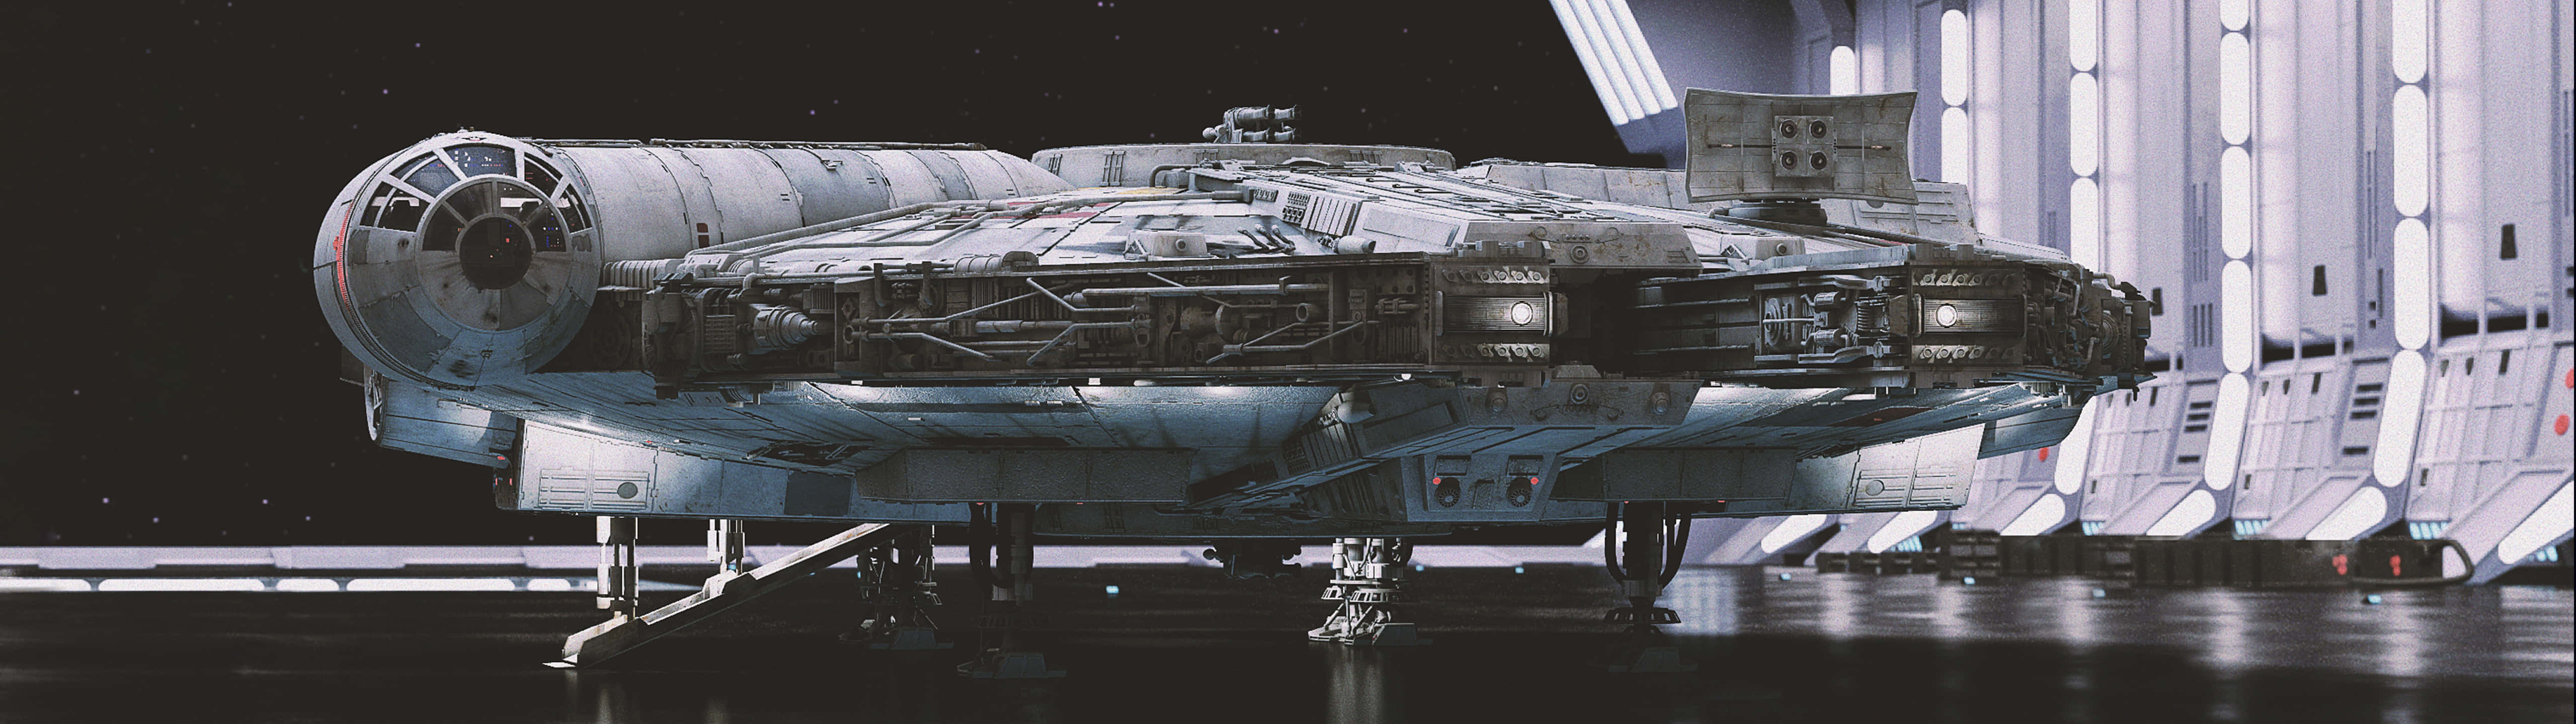 The iconic Millennium Falcon, made famous by Han Solo Wallpaper